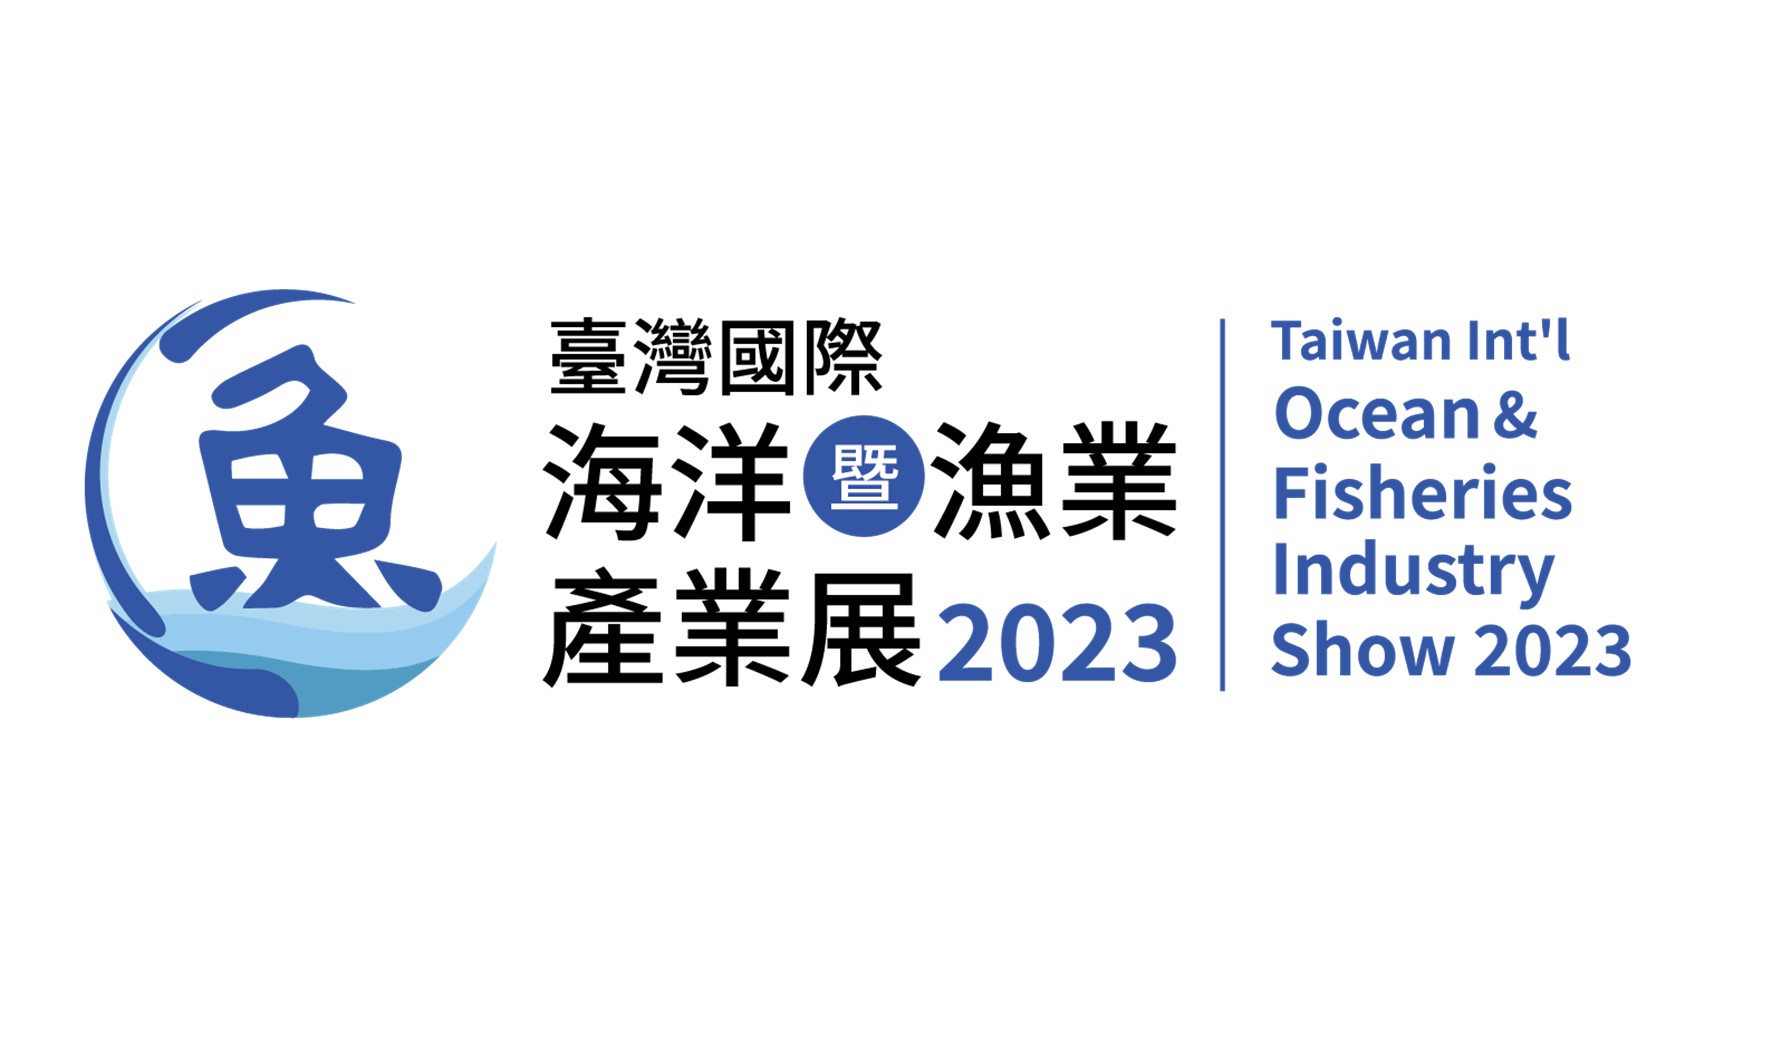 Taiwan International Ocean and Fisheries Industry Show 2023